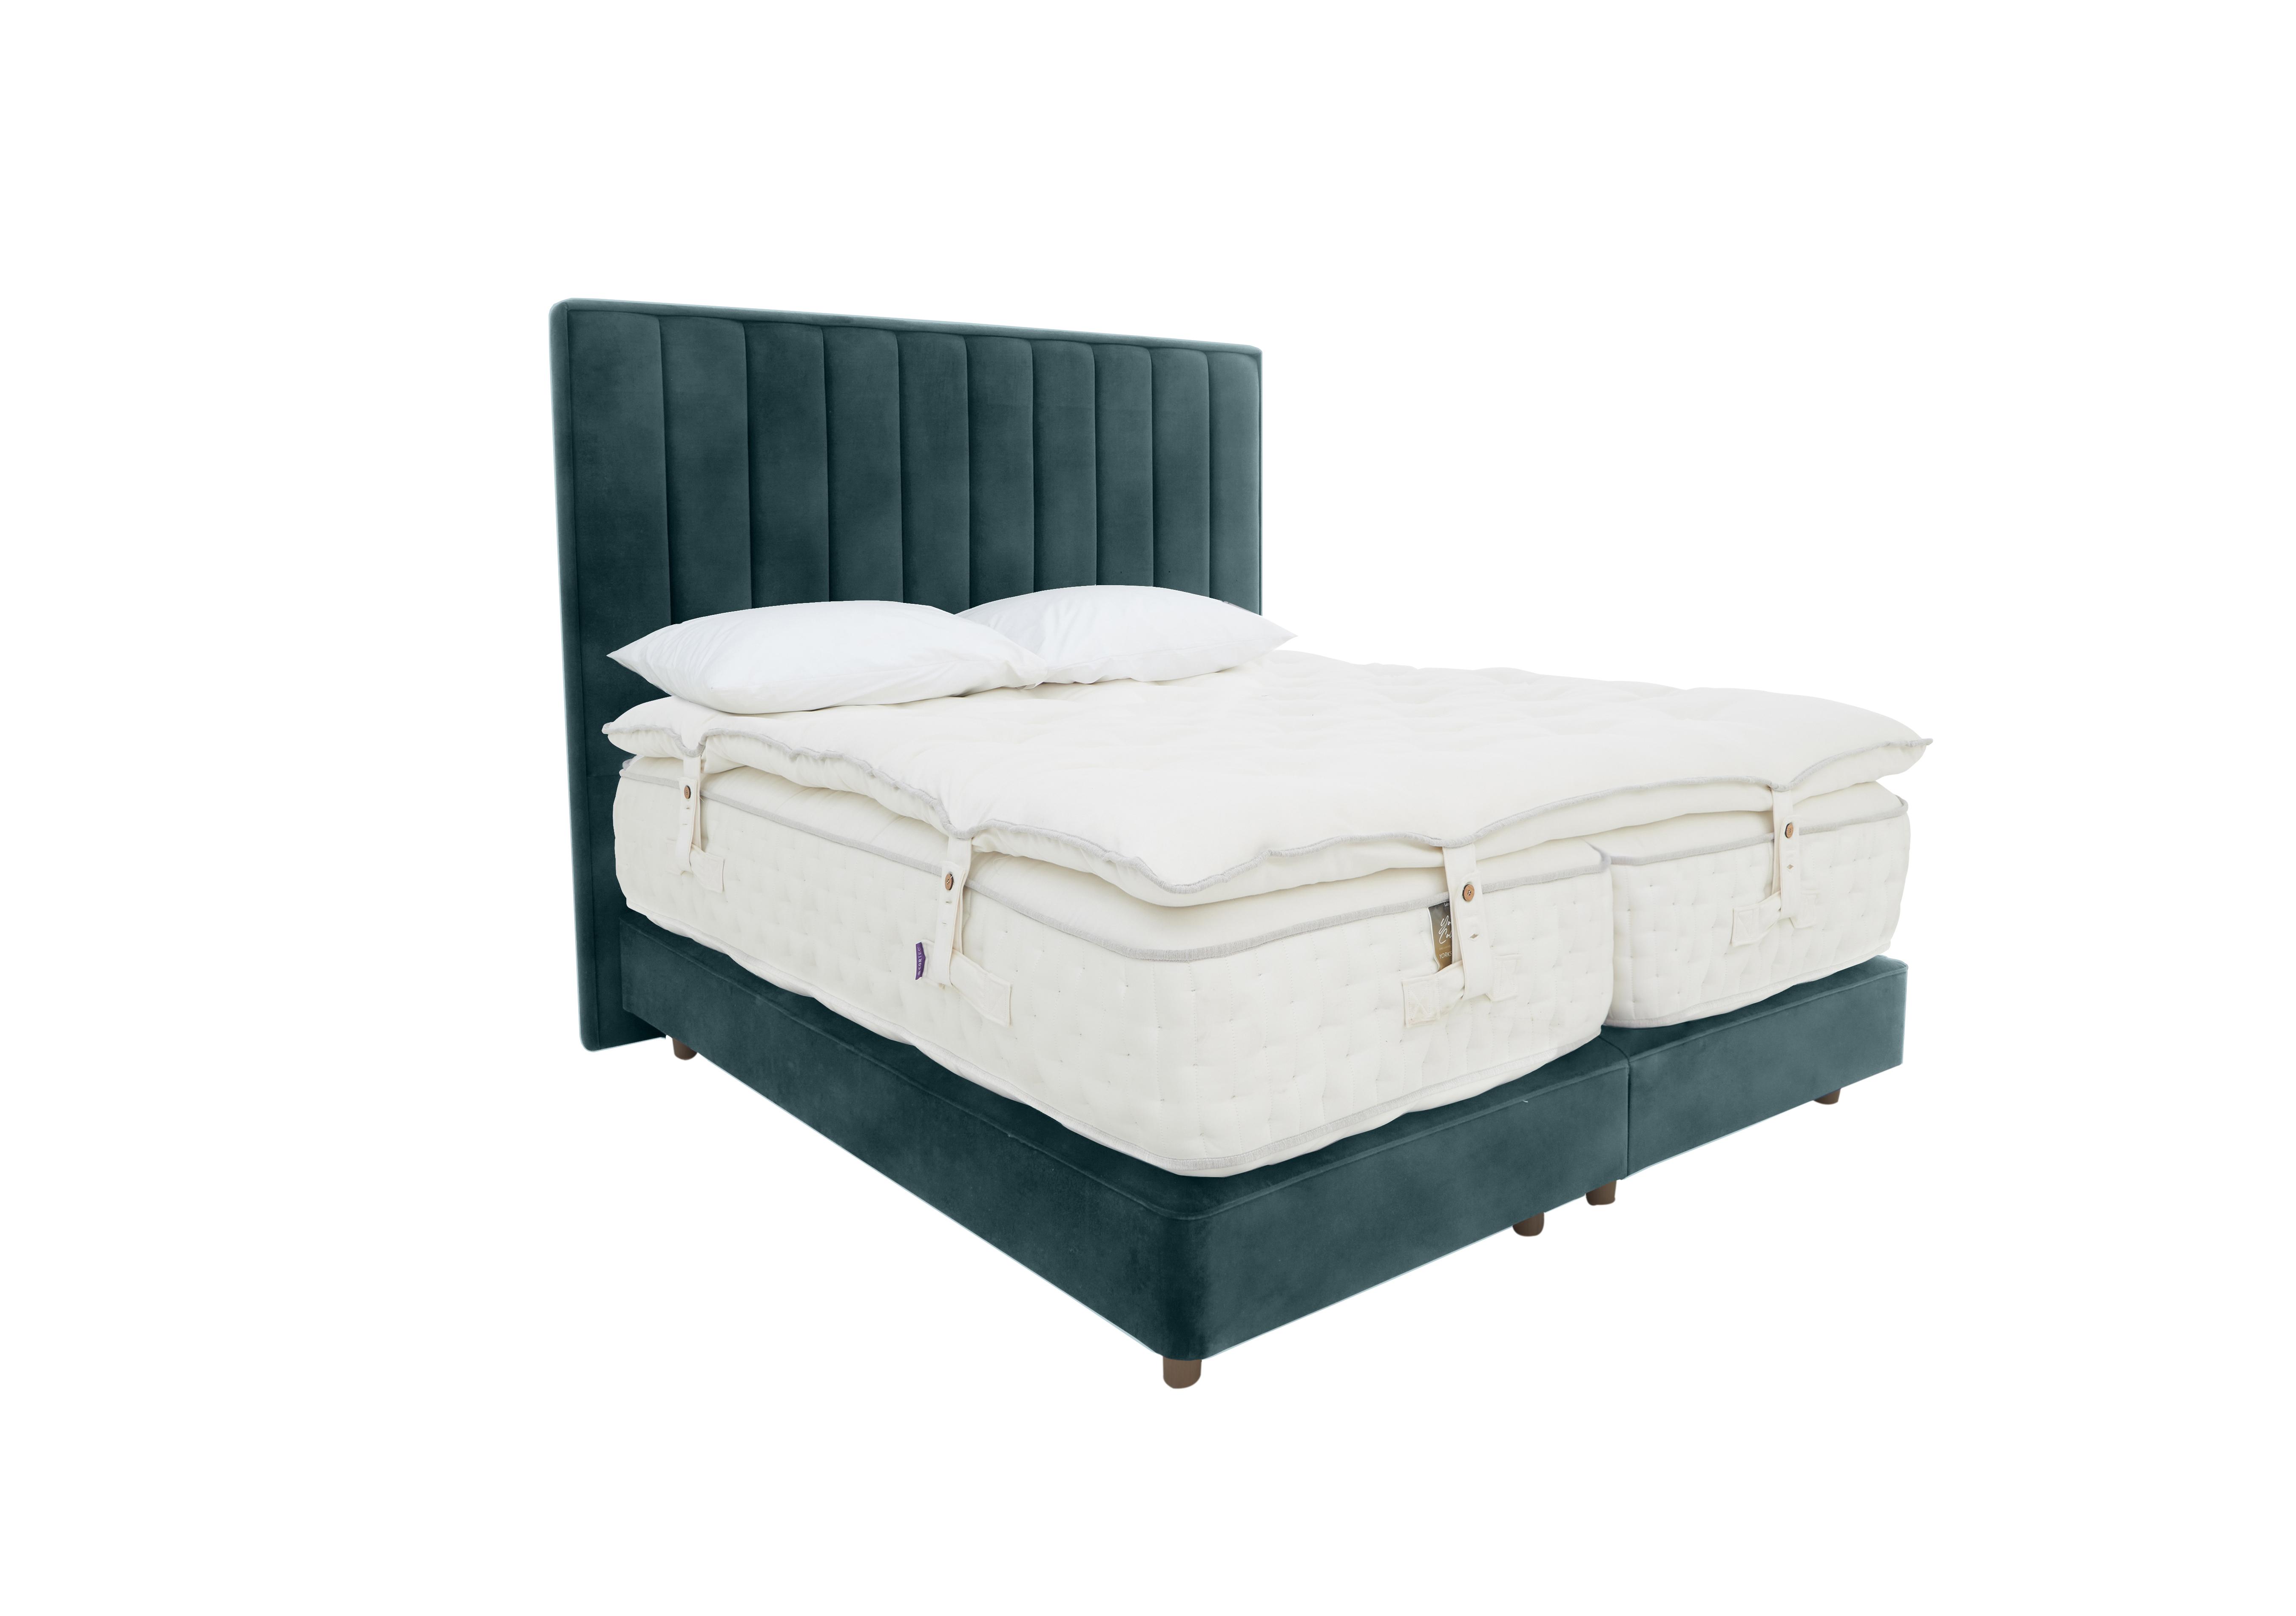 Yorkshire 40K Shallow Divan Set with Zip and Link Mattress with Mattress Topper in Lovely Ocean on Furniture Village